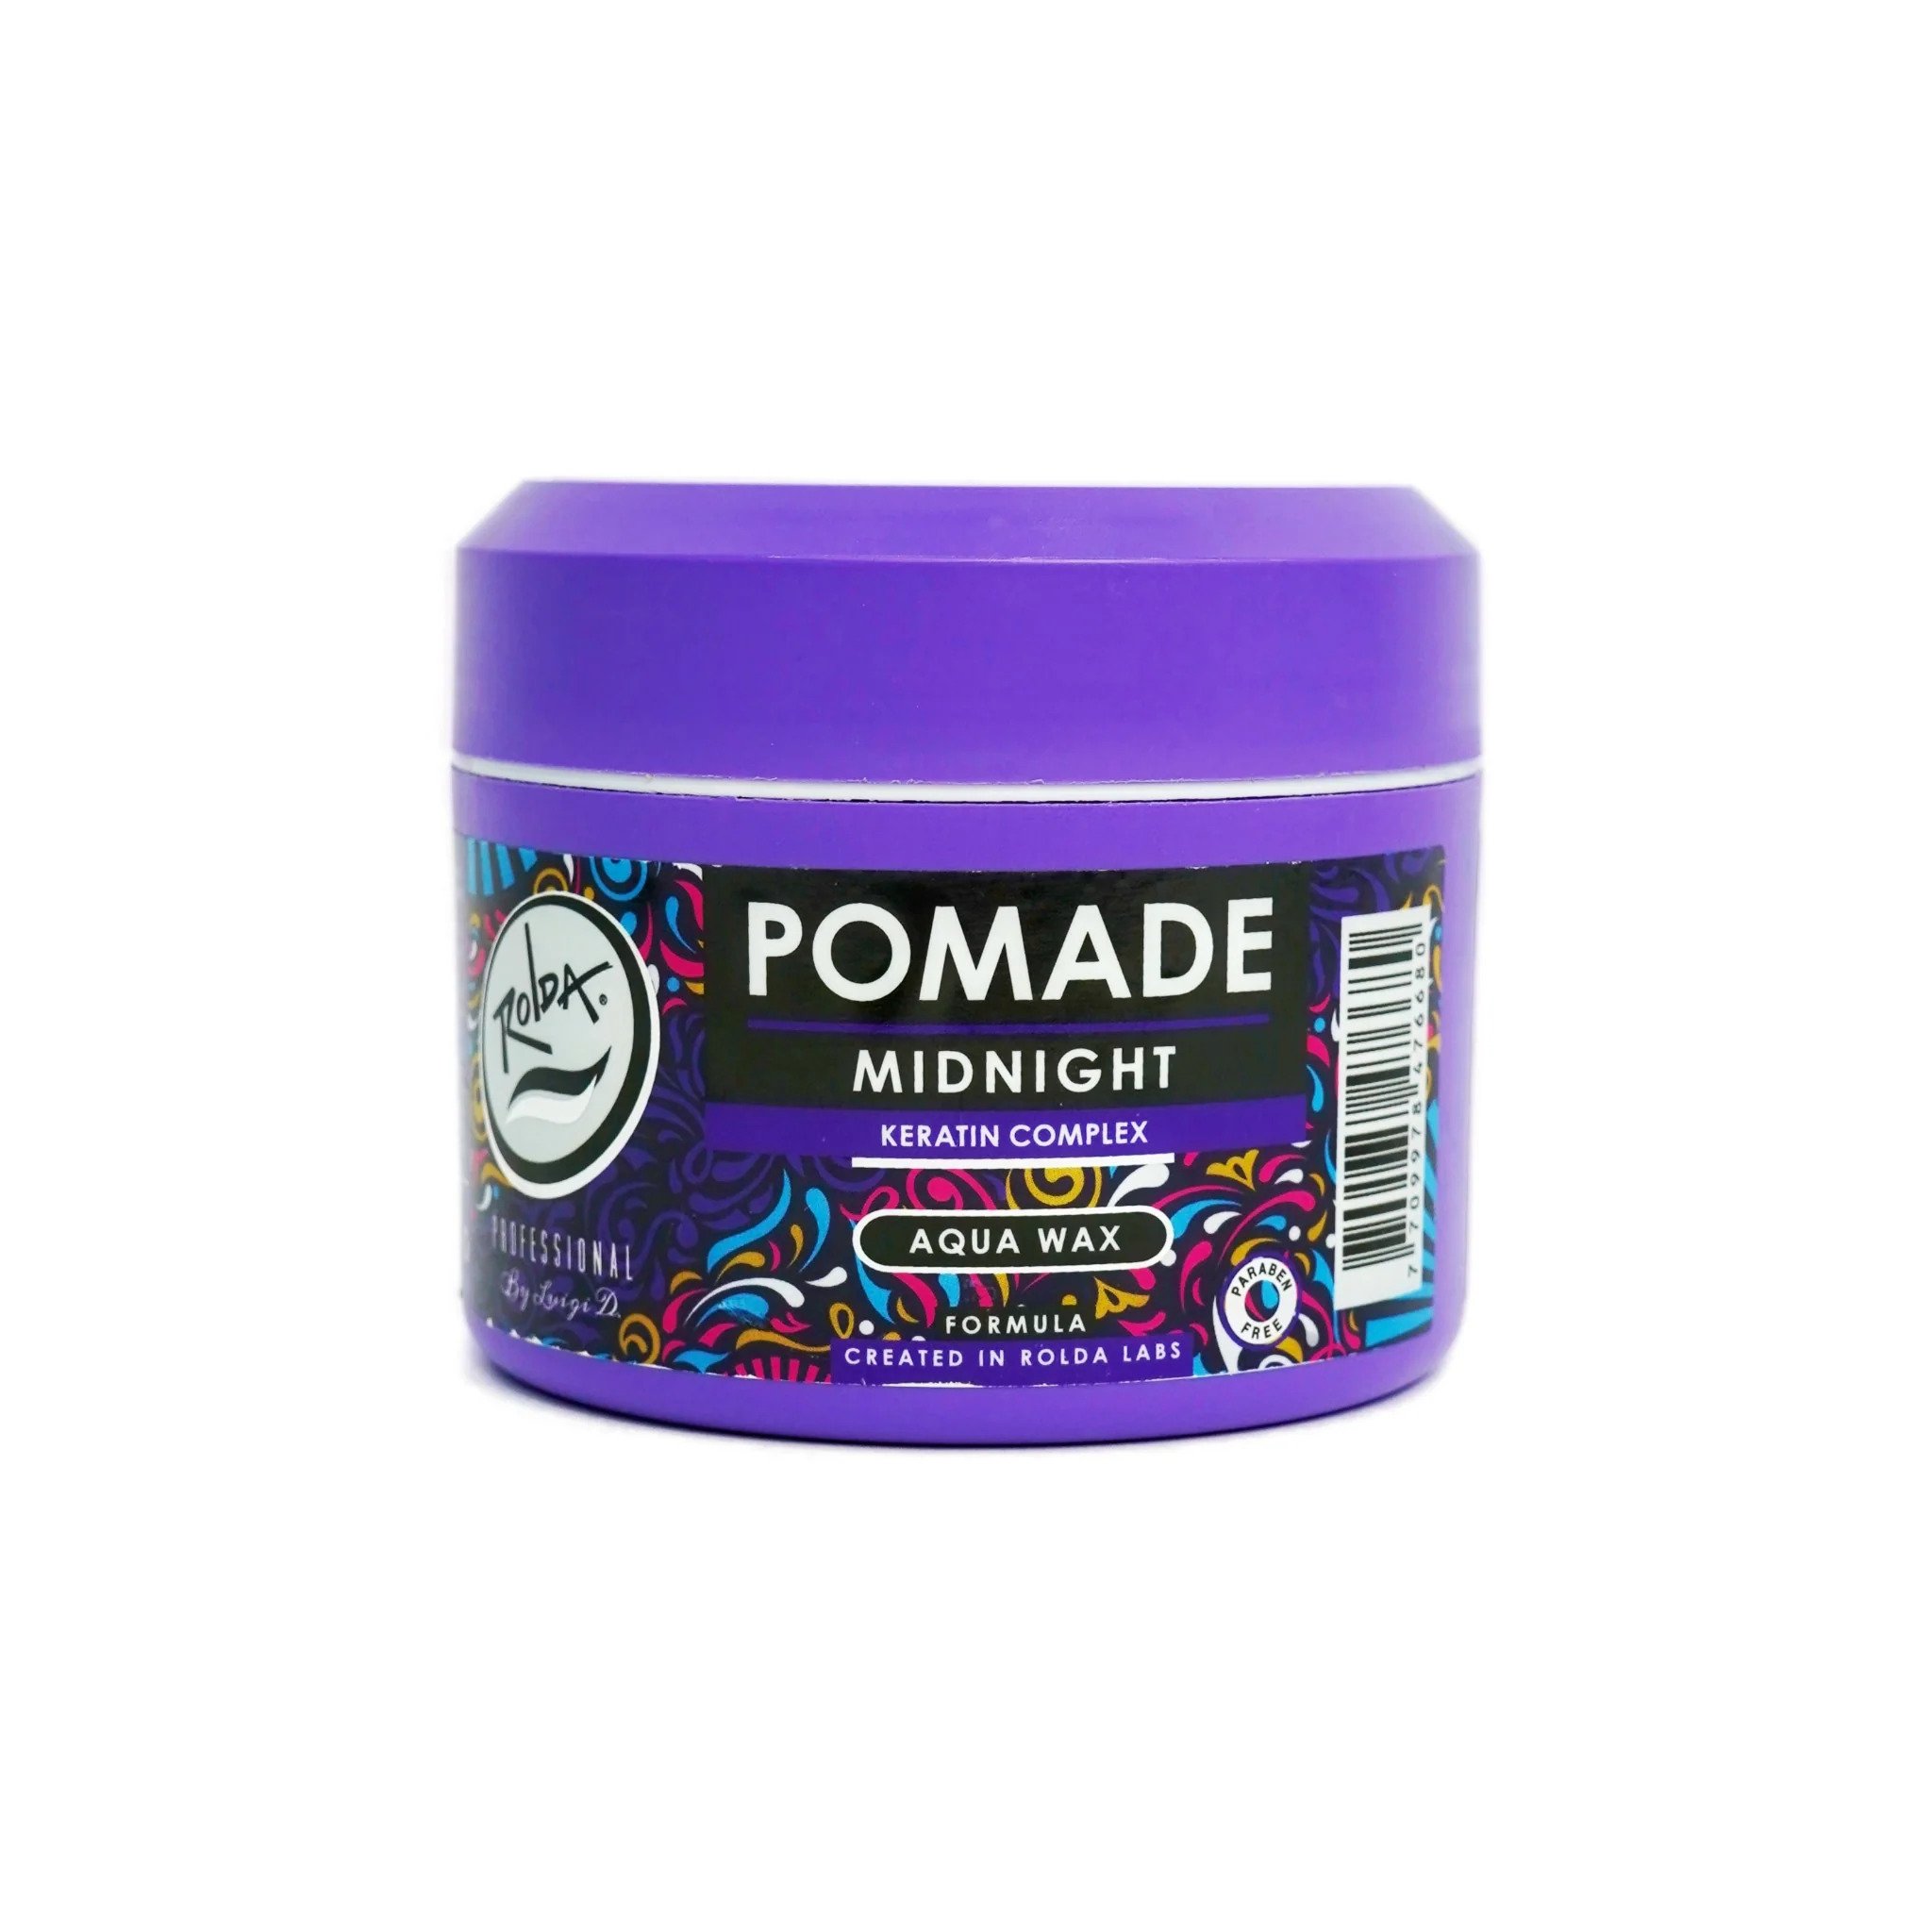 Midnight Hair Pomade with Keratin Complex - Water-Based, Medium Hold